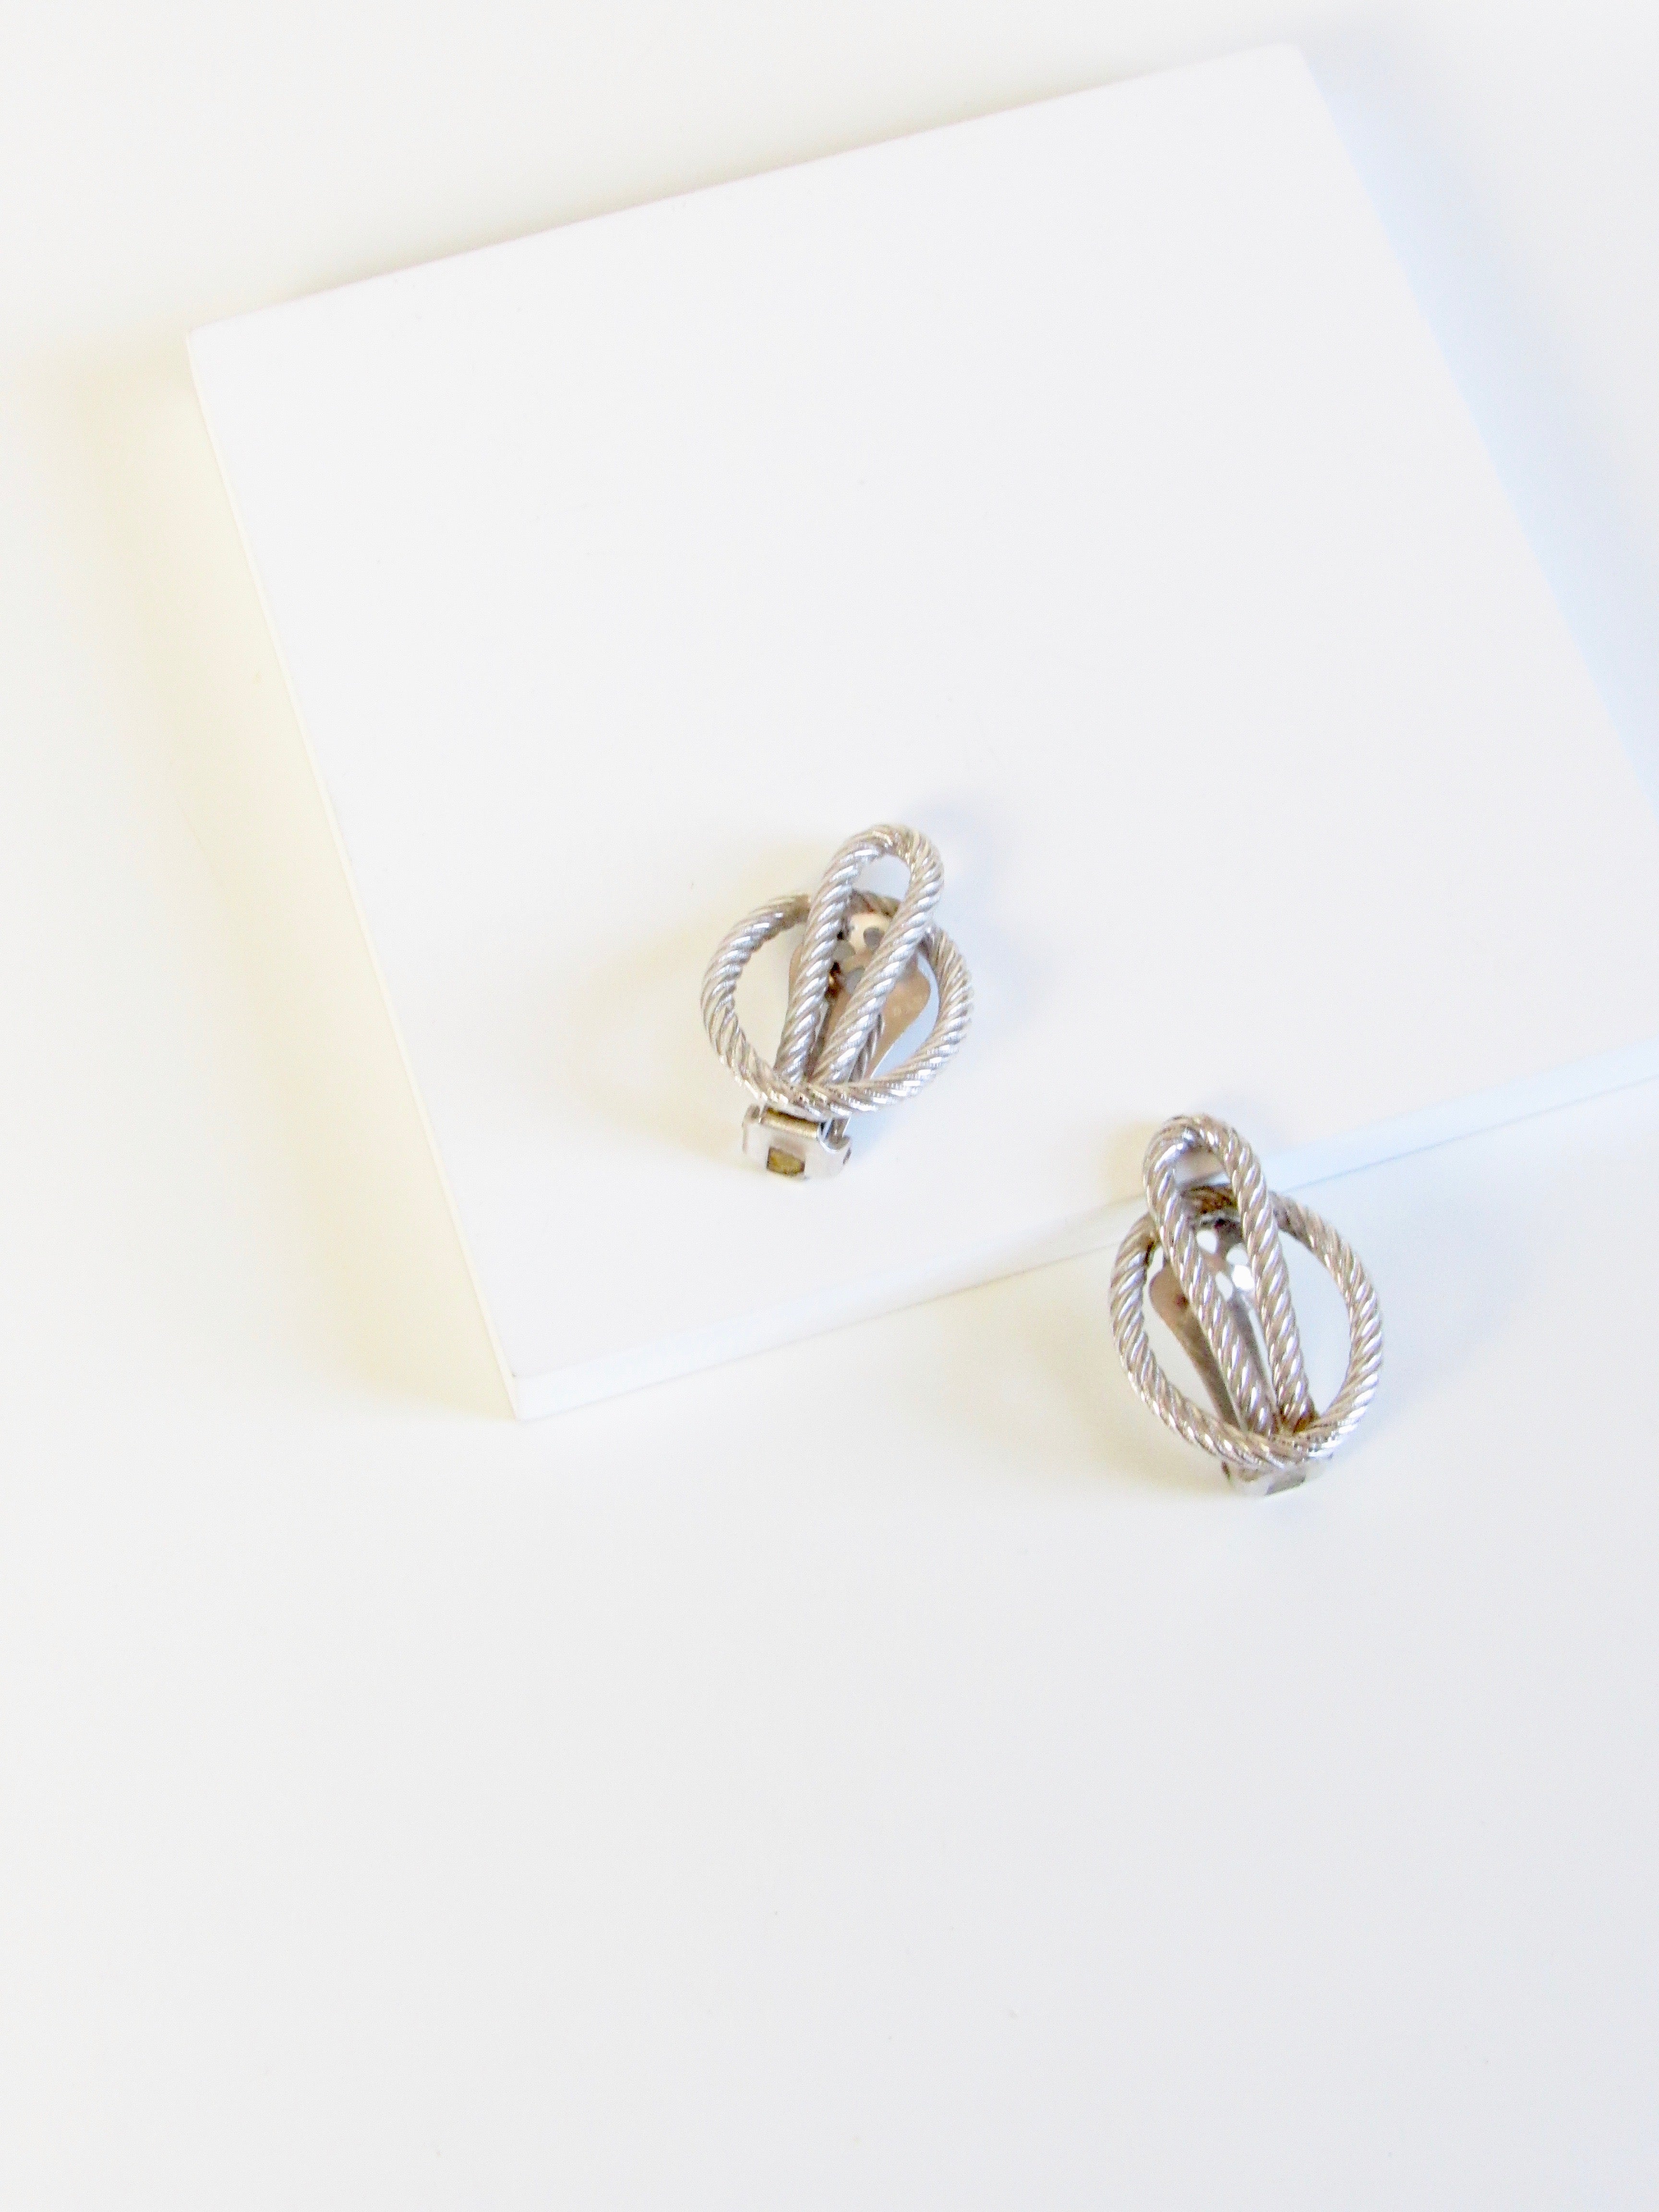 Vintage Knotted Rope Silver Tone Clip On Earrings